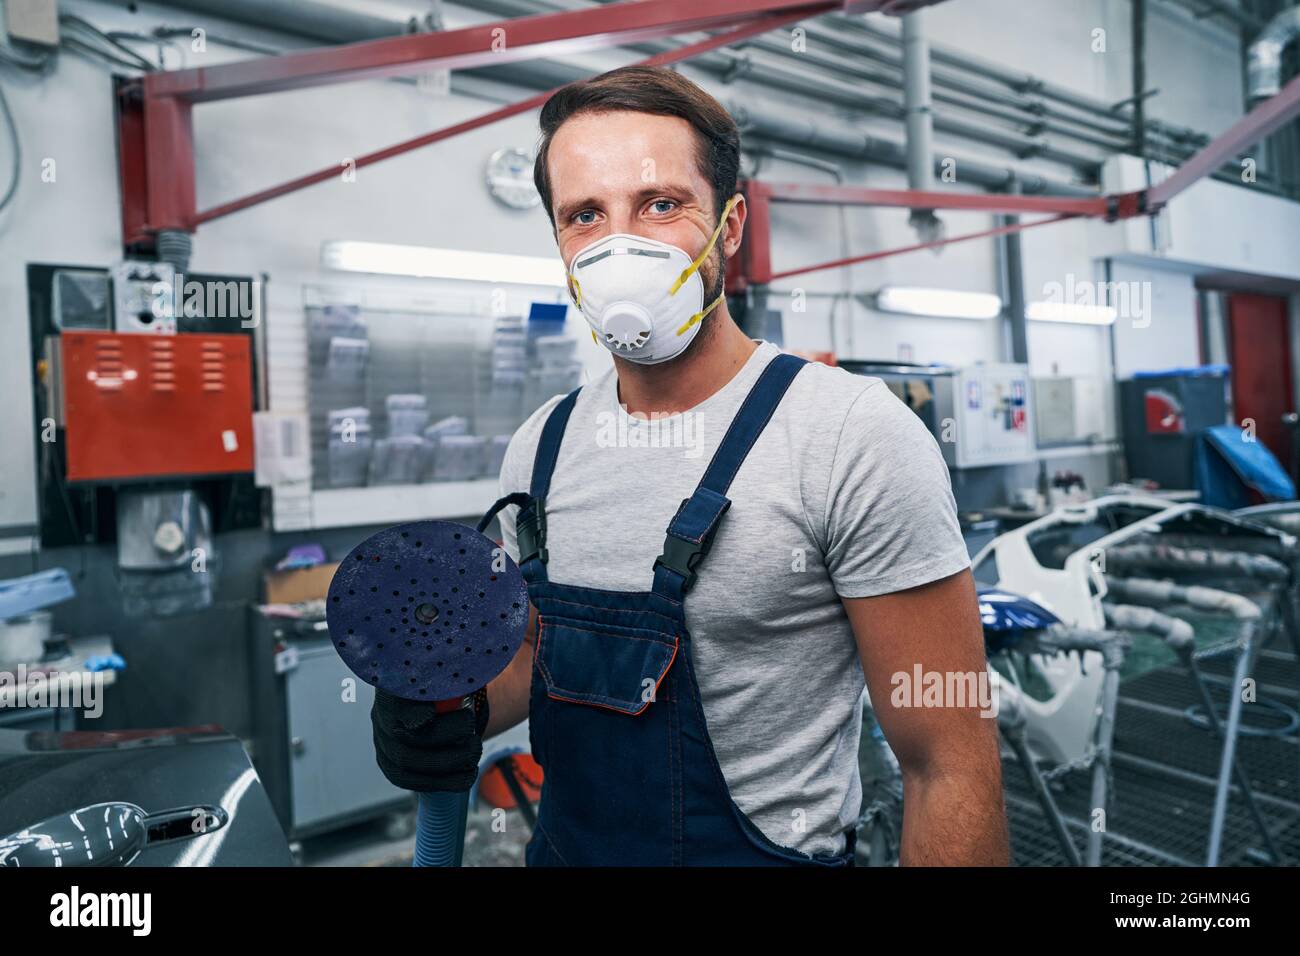 Proud auto mechanic looking at camera with sander in hand Stock Photo